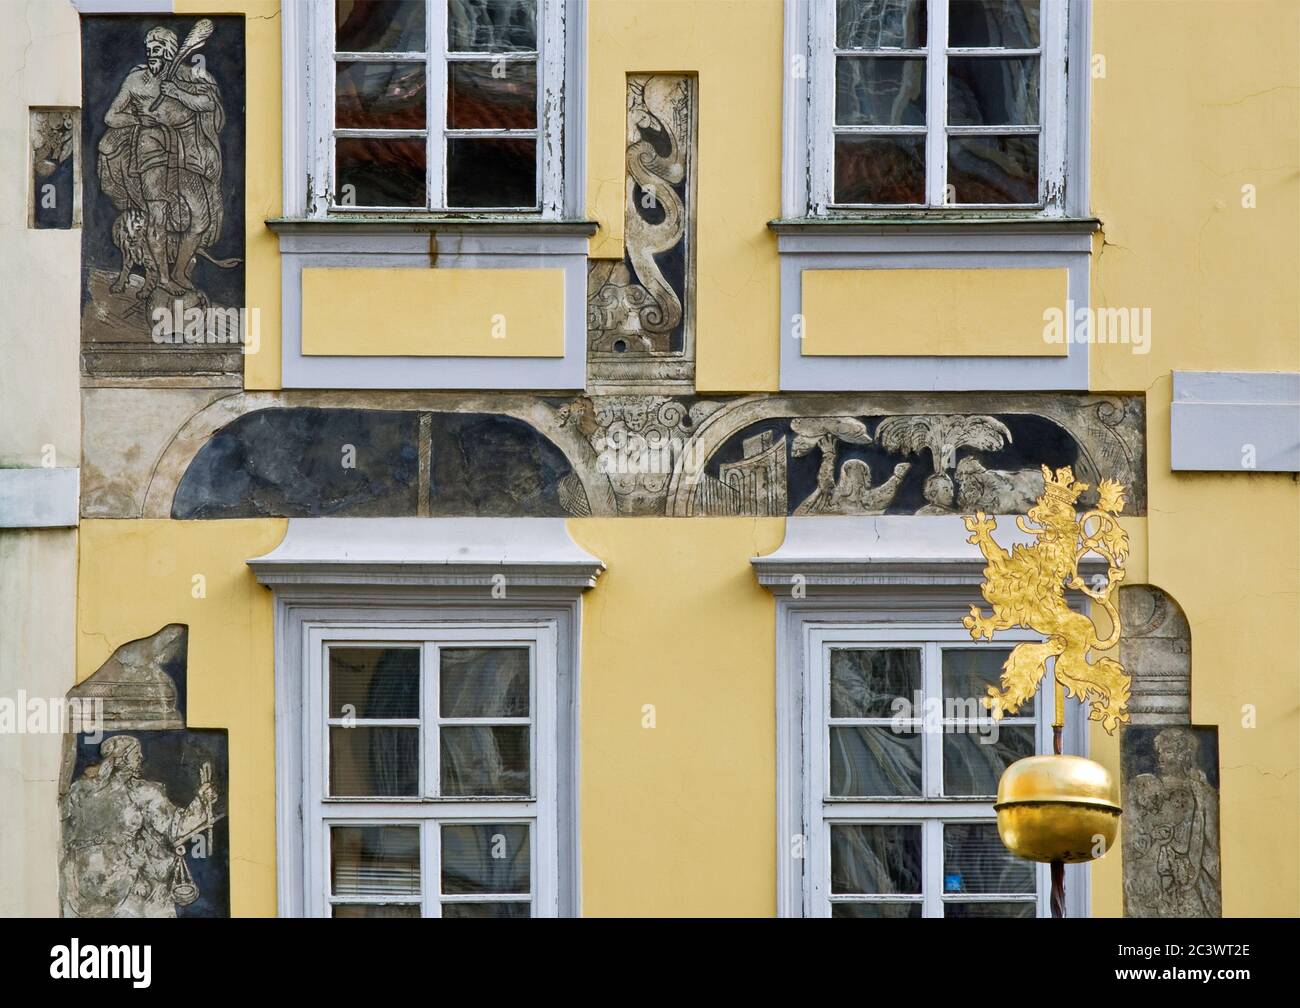 Bohemian lion at fountain and sgraffiti on house at Male Namesti in Old Town, Prague, Czech Republic Stock Photo